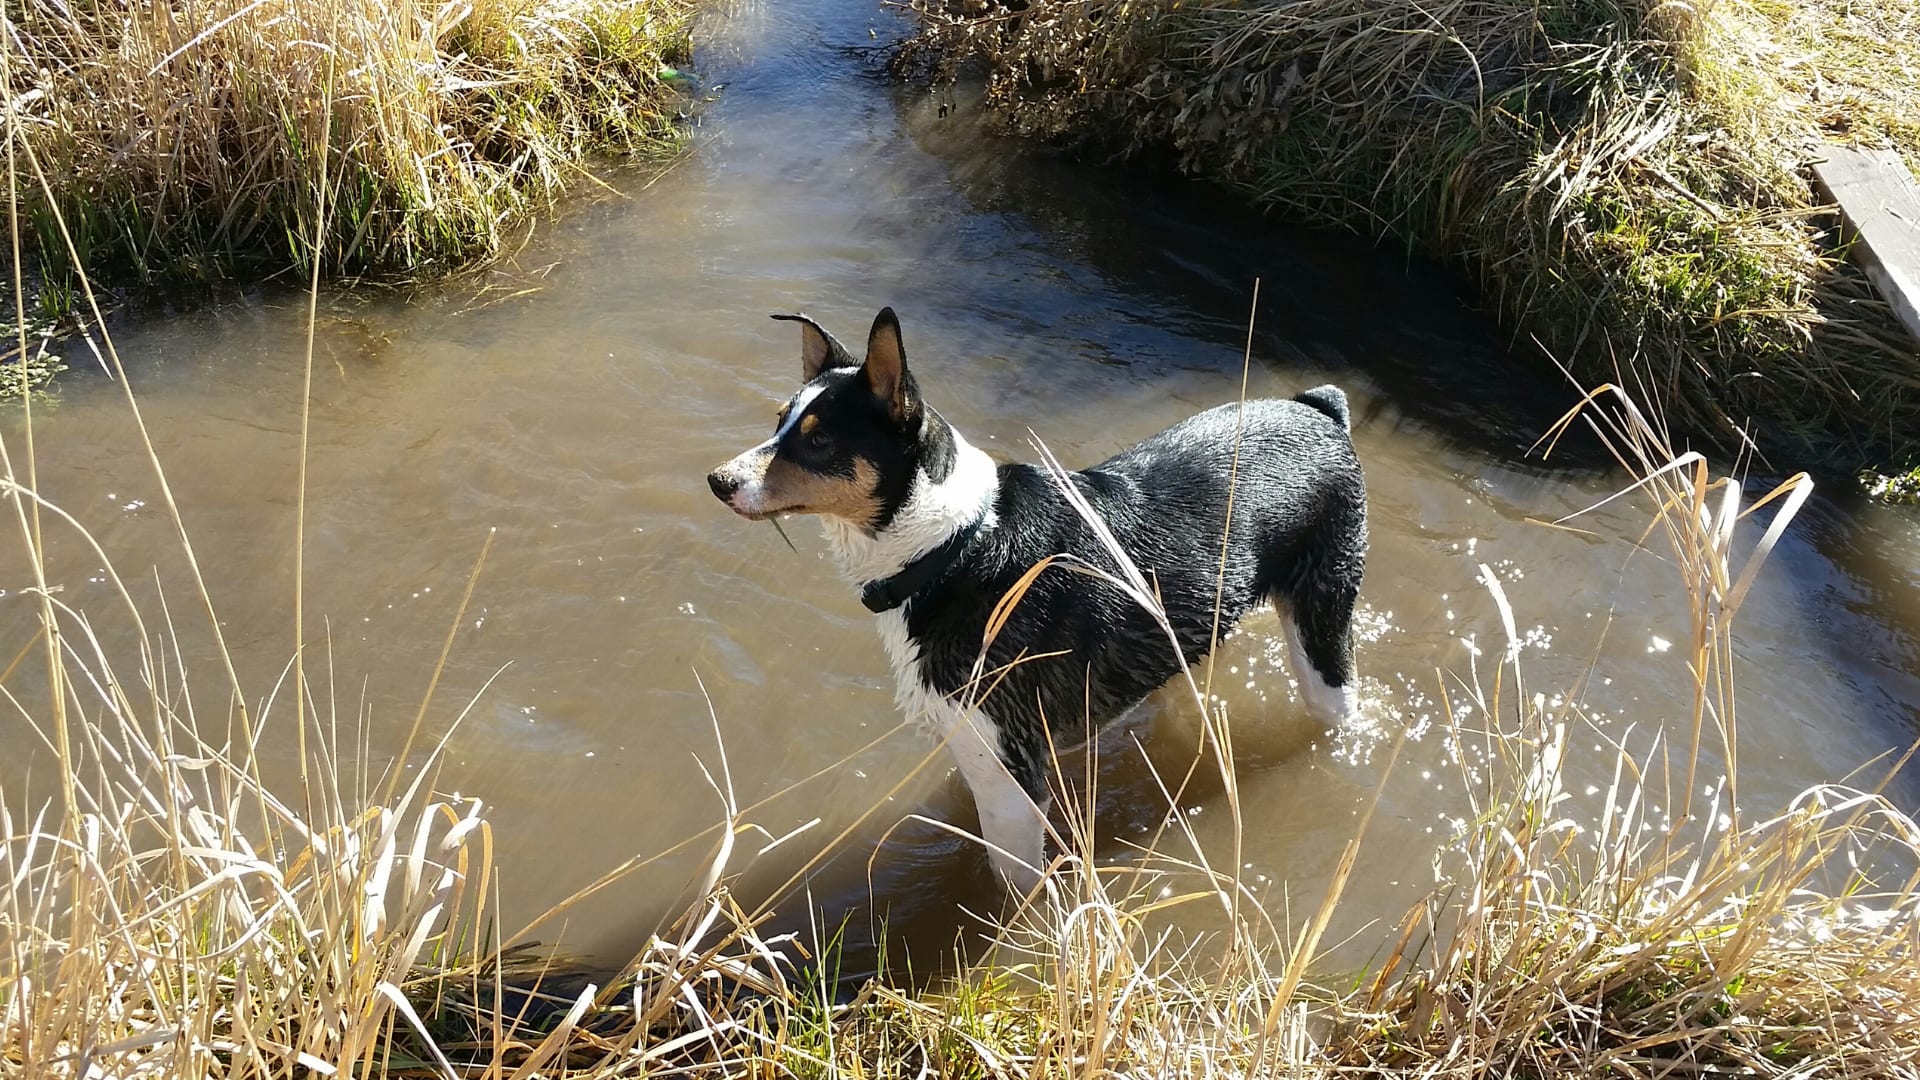 Dog in muddy pond at Chapman Valley Park.